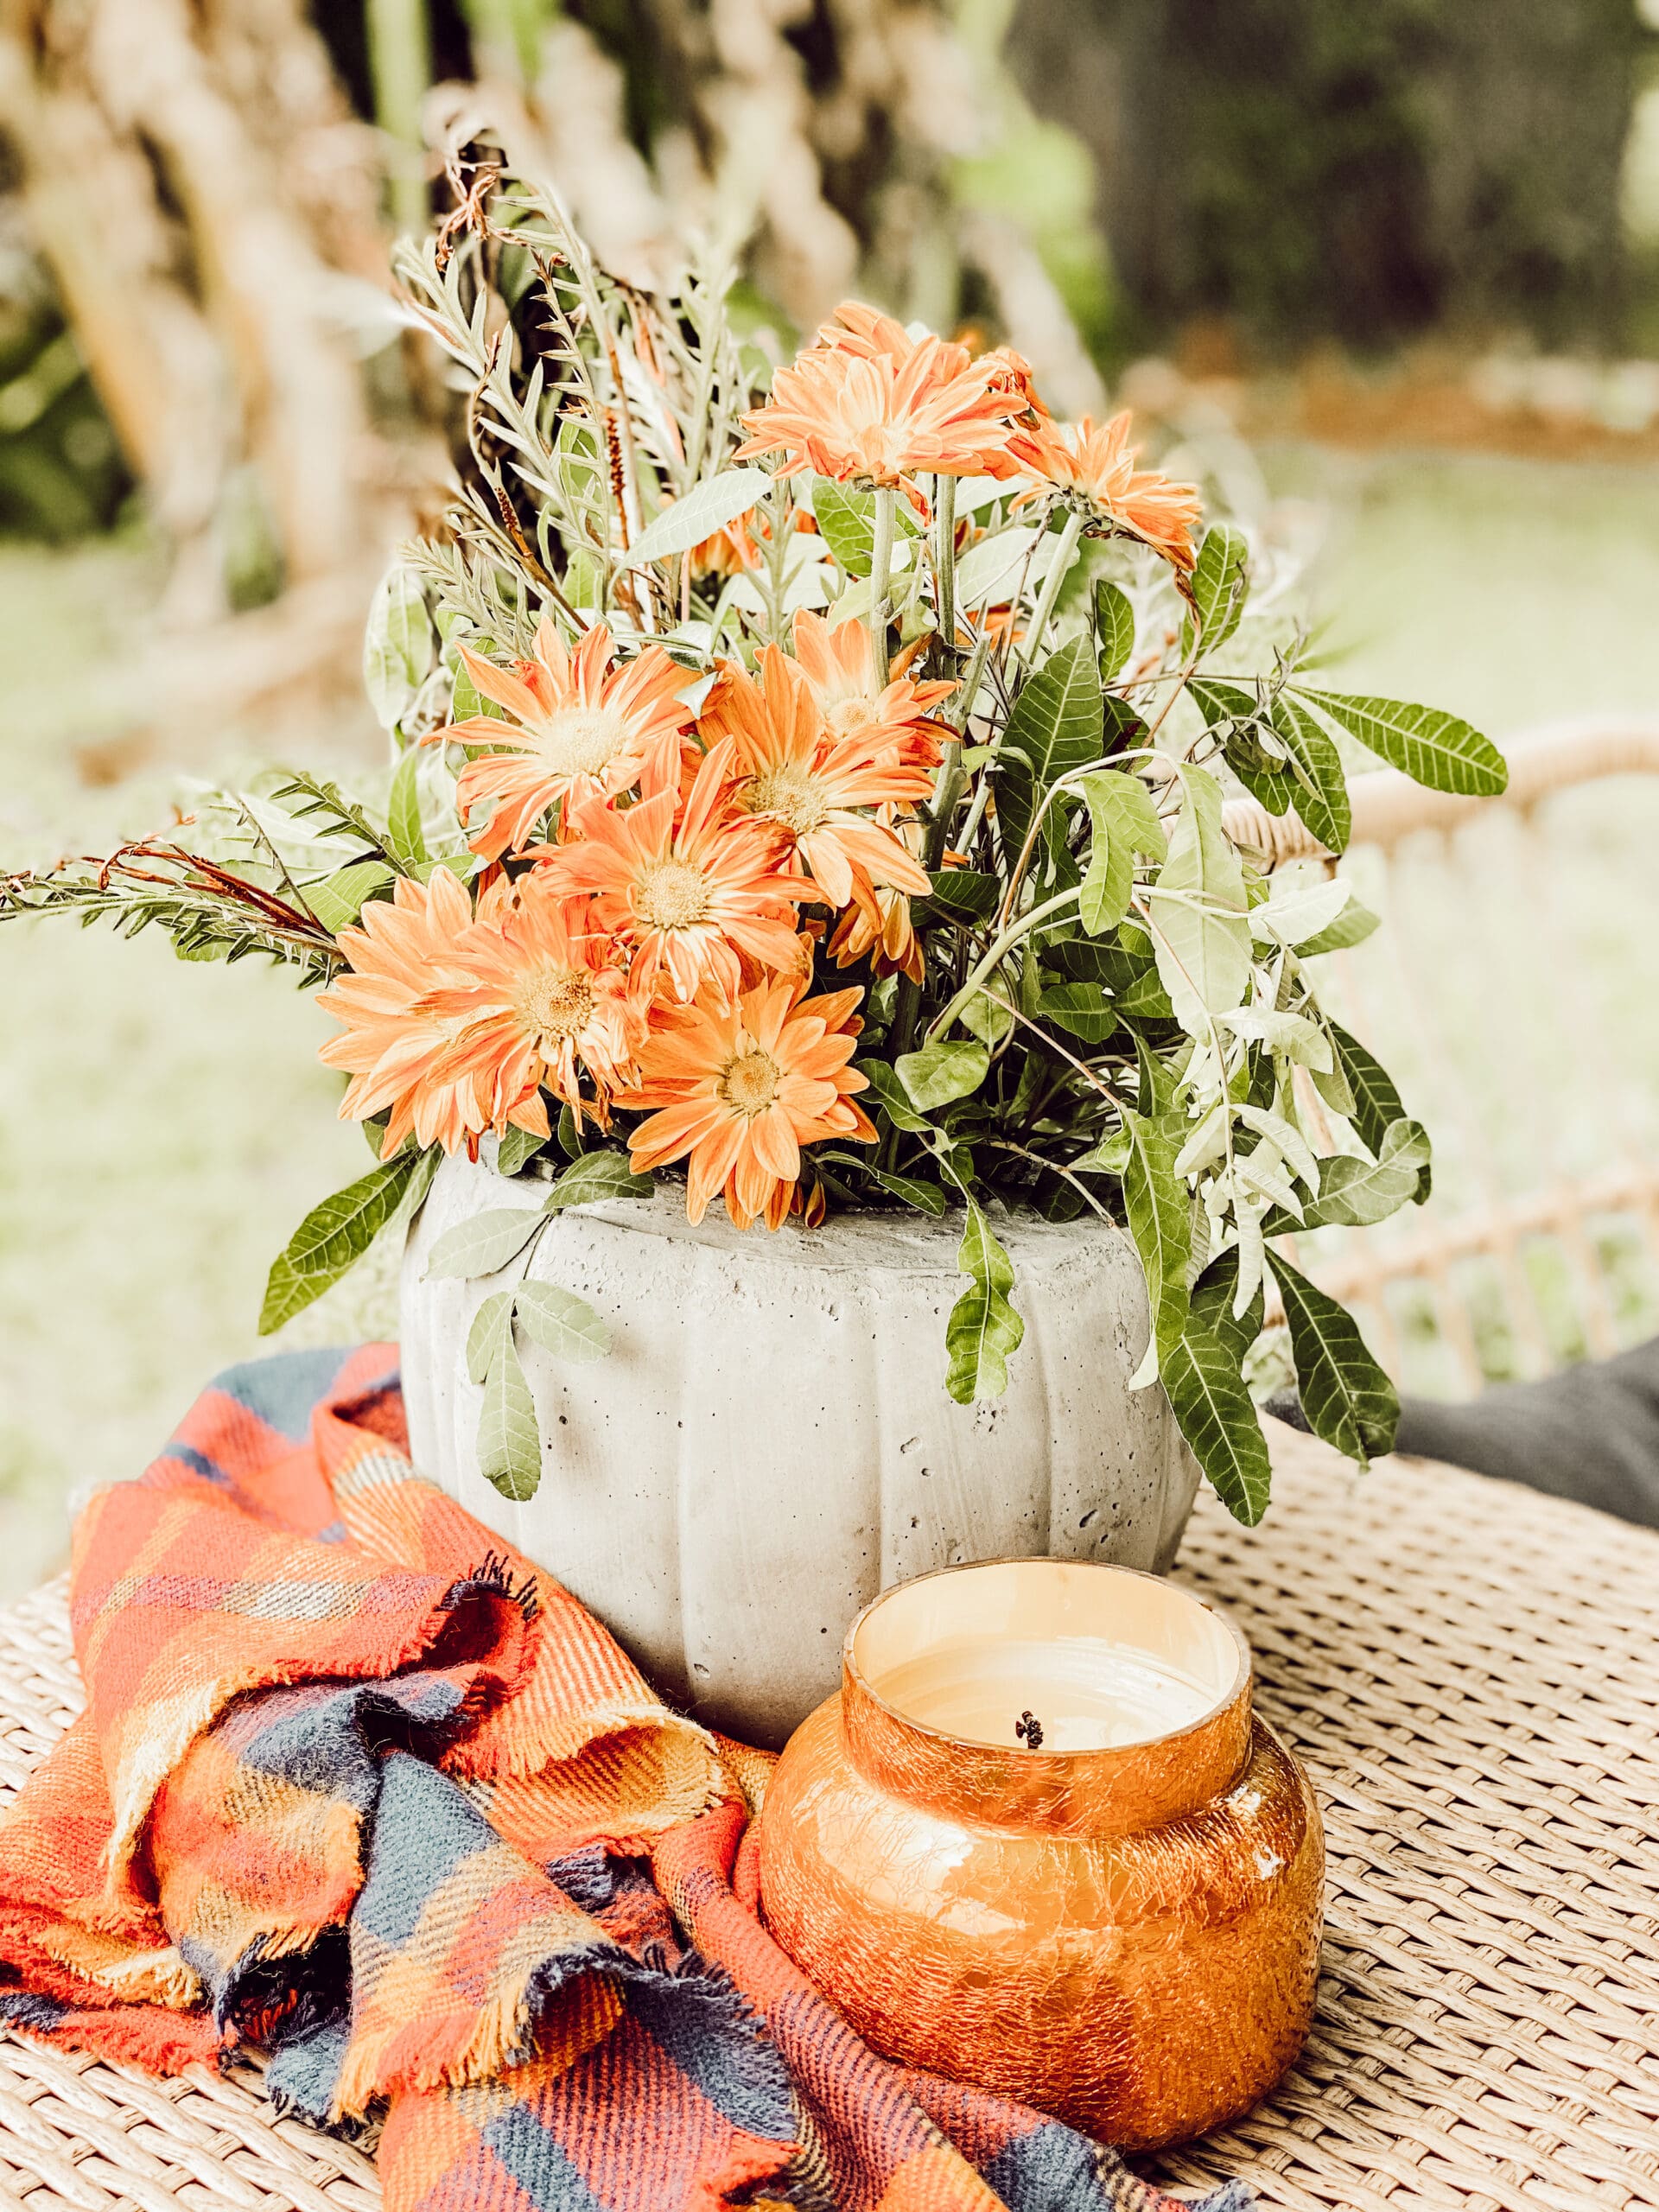 How To Make A Flower Vase Out Of A Pumpkin